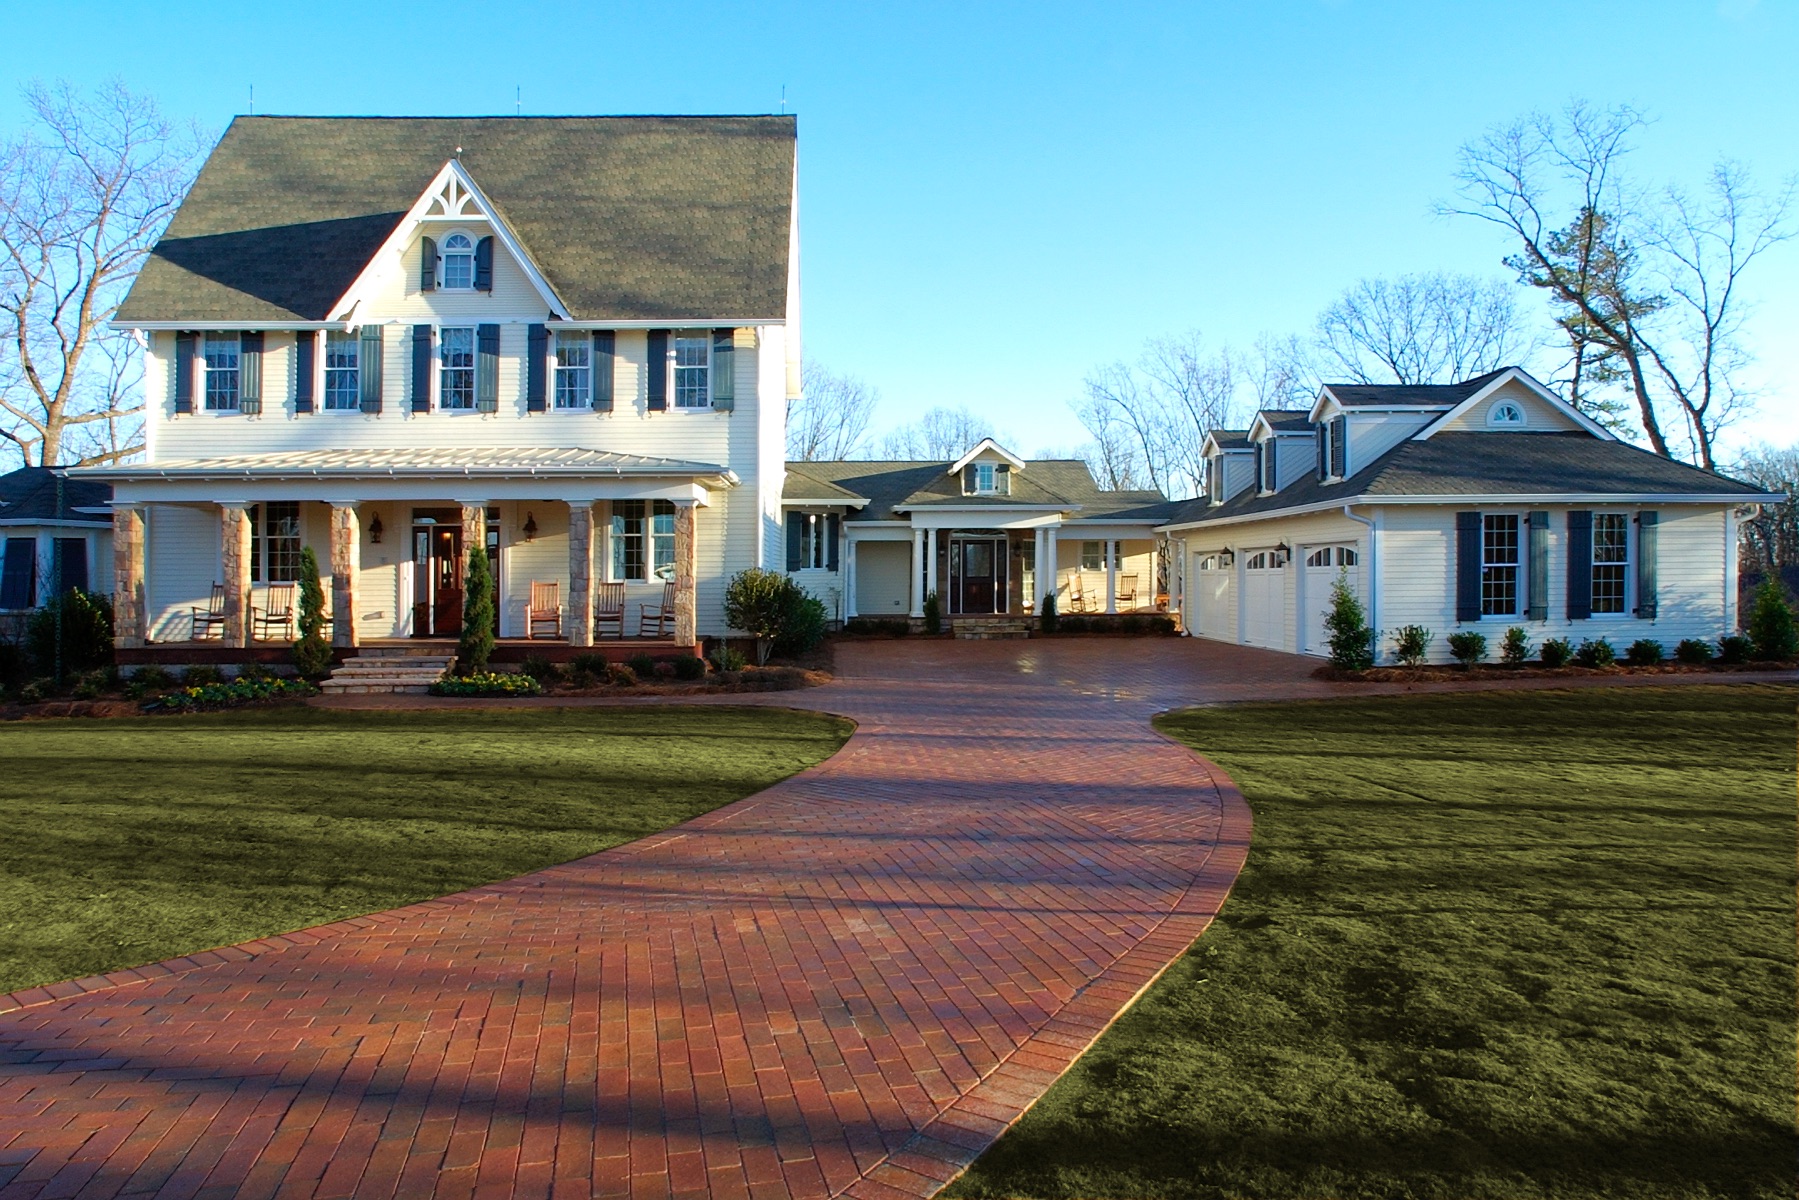 Residential driveway feature brick pavers